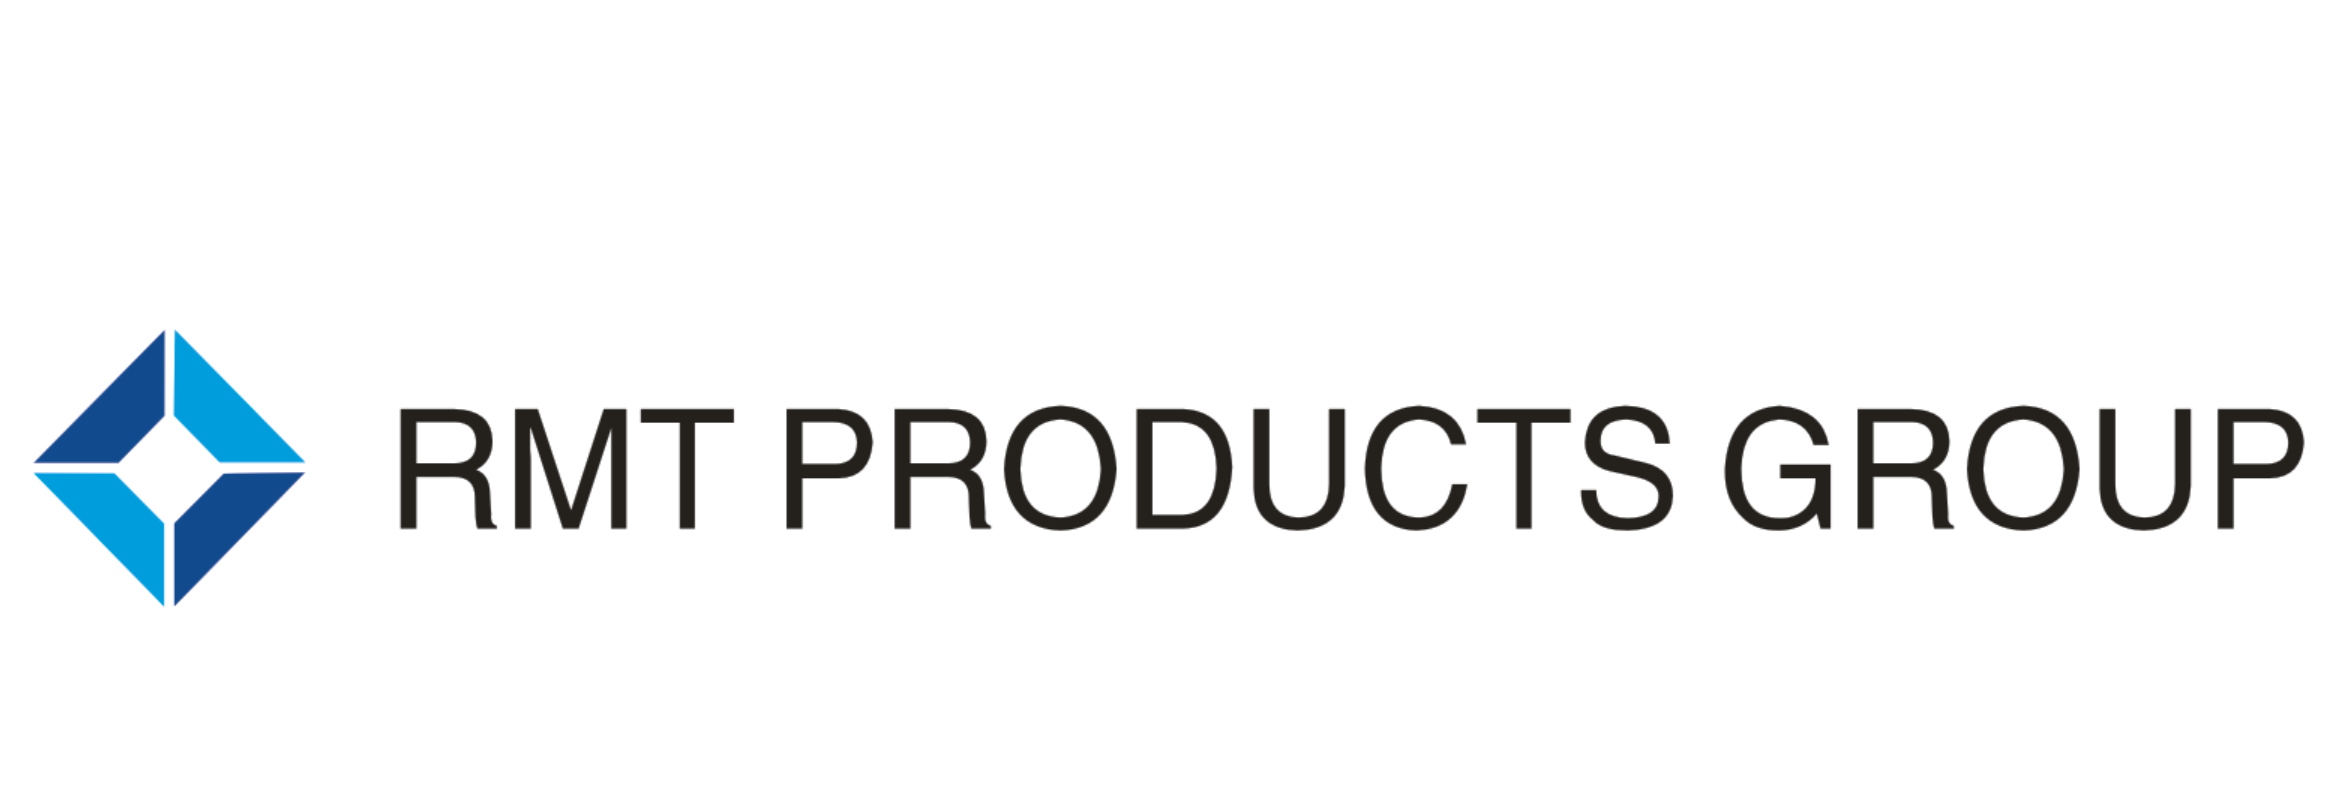 RMT Products Group